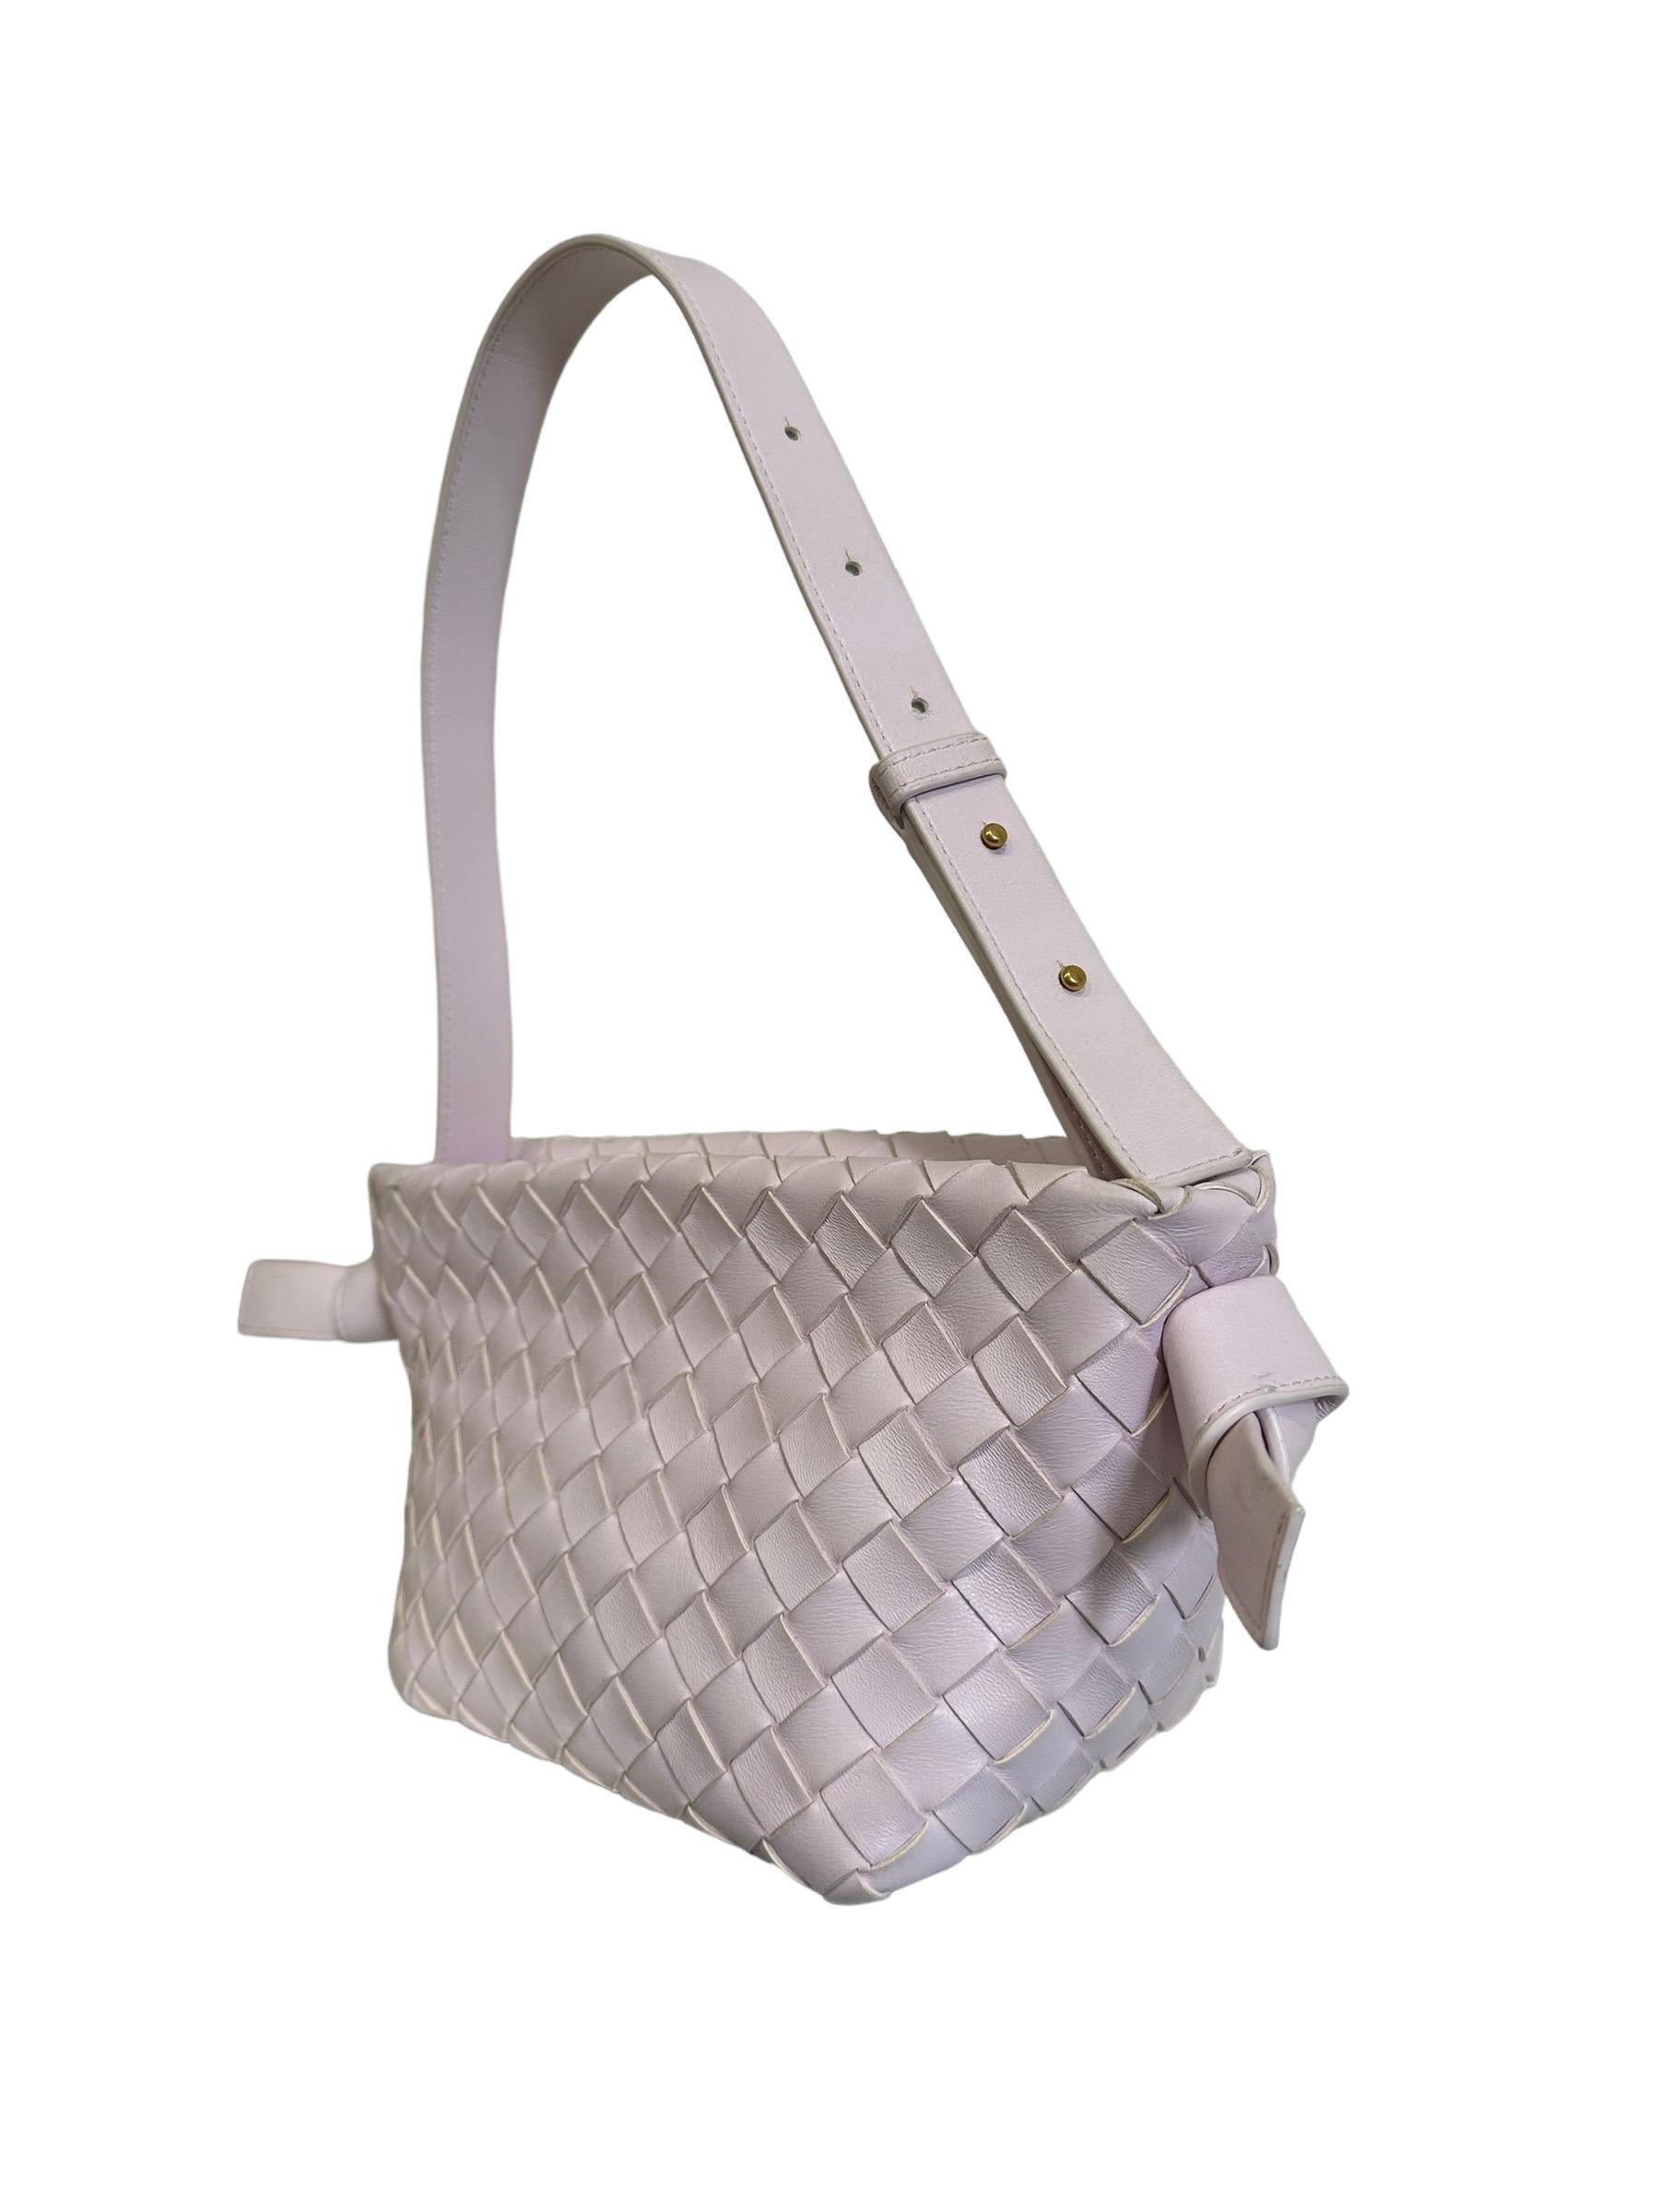 Bottega Veneta bag, Tie model, made of candy pink woven lambskin with gold hardware. Equipped with a magnetic closure, internally lined in leather, roomy for the essentials. Equipped with a smooth adjustable leather handle. Equipped with